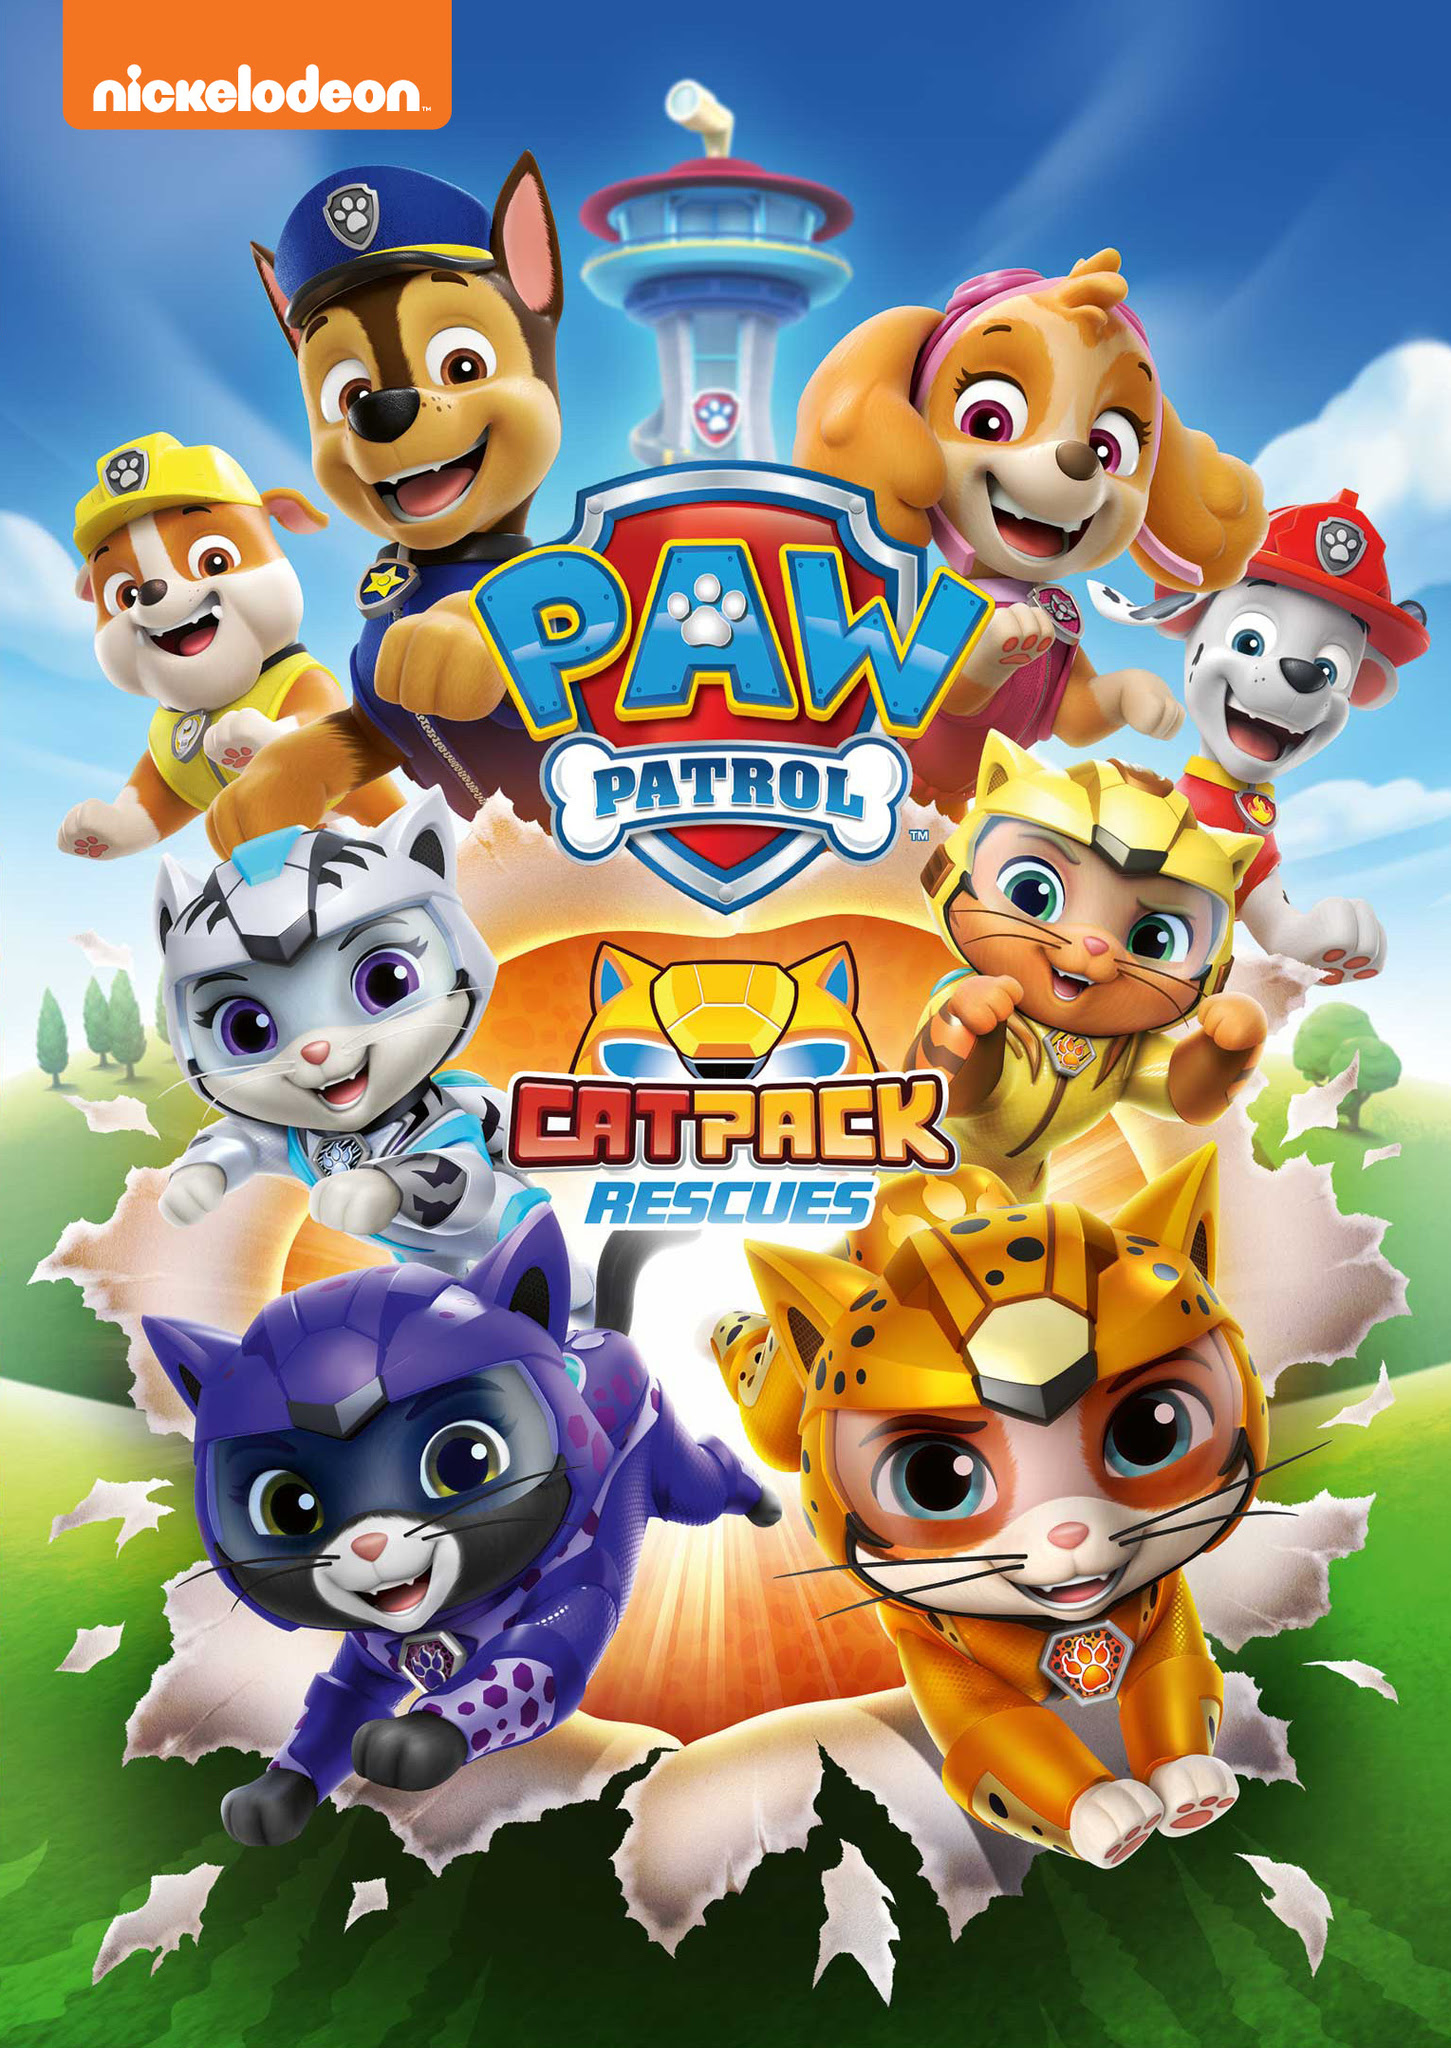 paw patrol cat pack rescues available on dvd 9.13.22